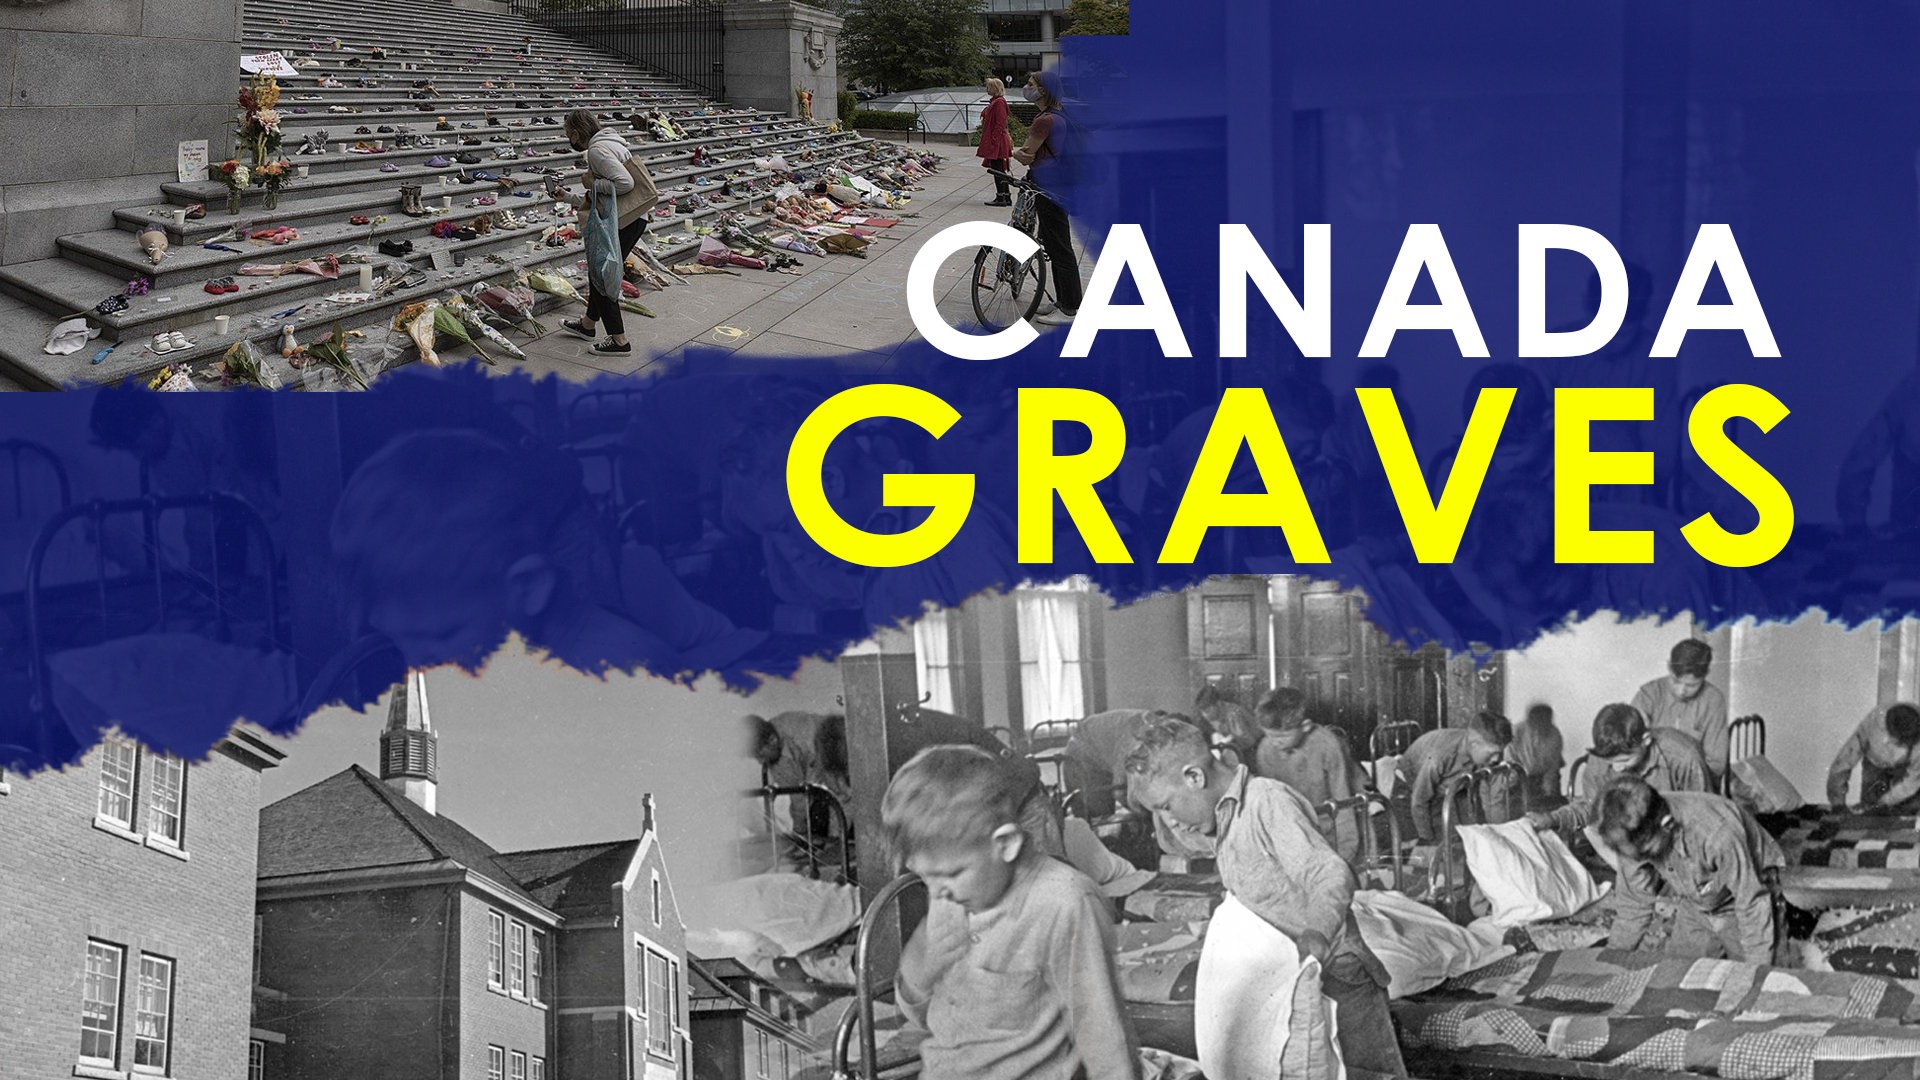 Canada graves 